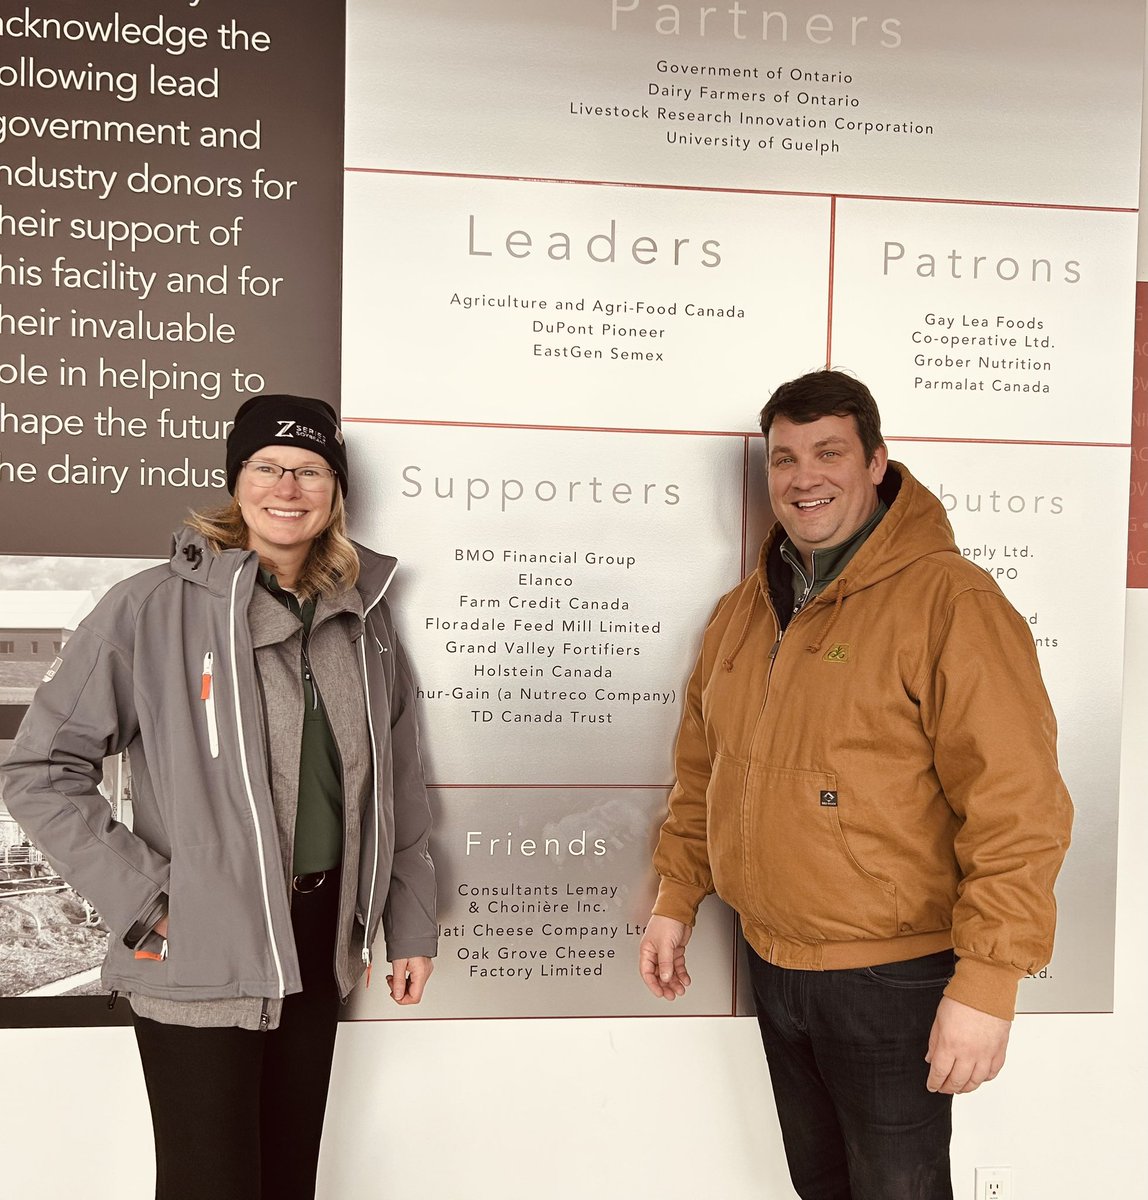 Grateful to @uofguelph for the opportunity for Growers and Agents to tour their Beef and Dairy facilities today! 🐄 Thank you for fostering a strong partnership with Pioneer that continues to thrive. Here's to the future of collaboration and innovation! 🌱@PioneerSeedsCA